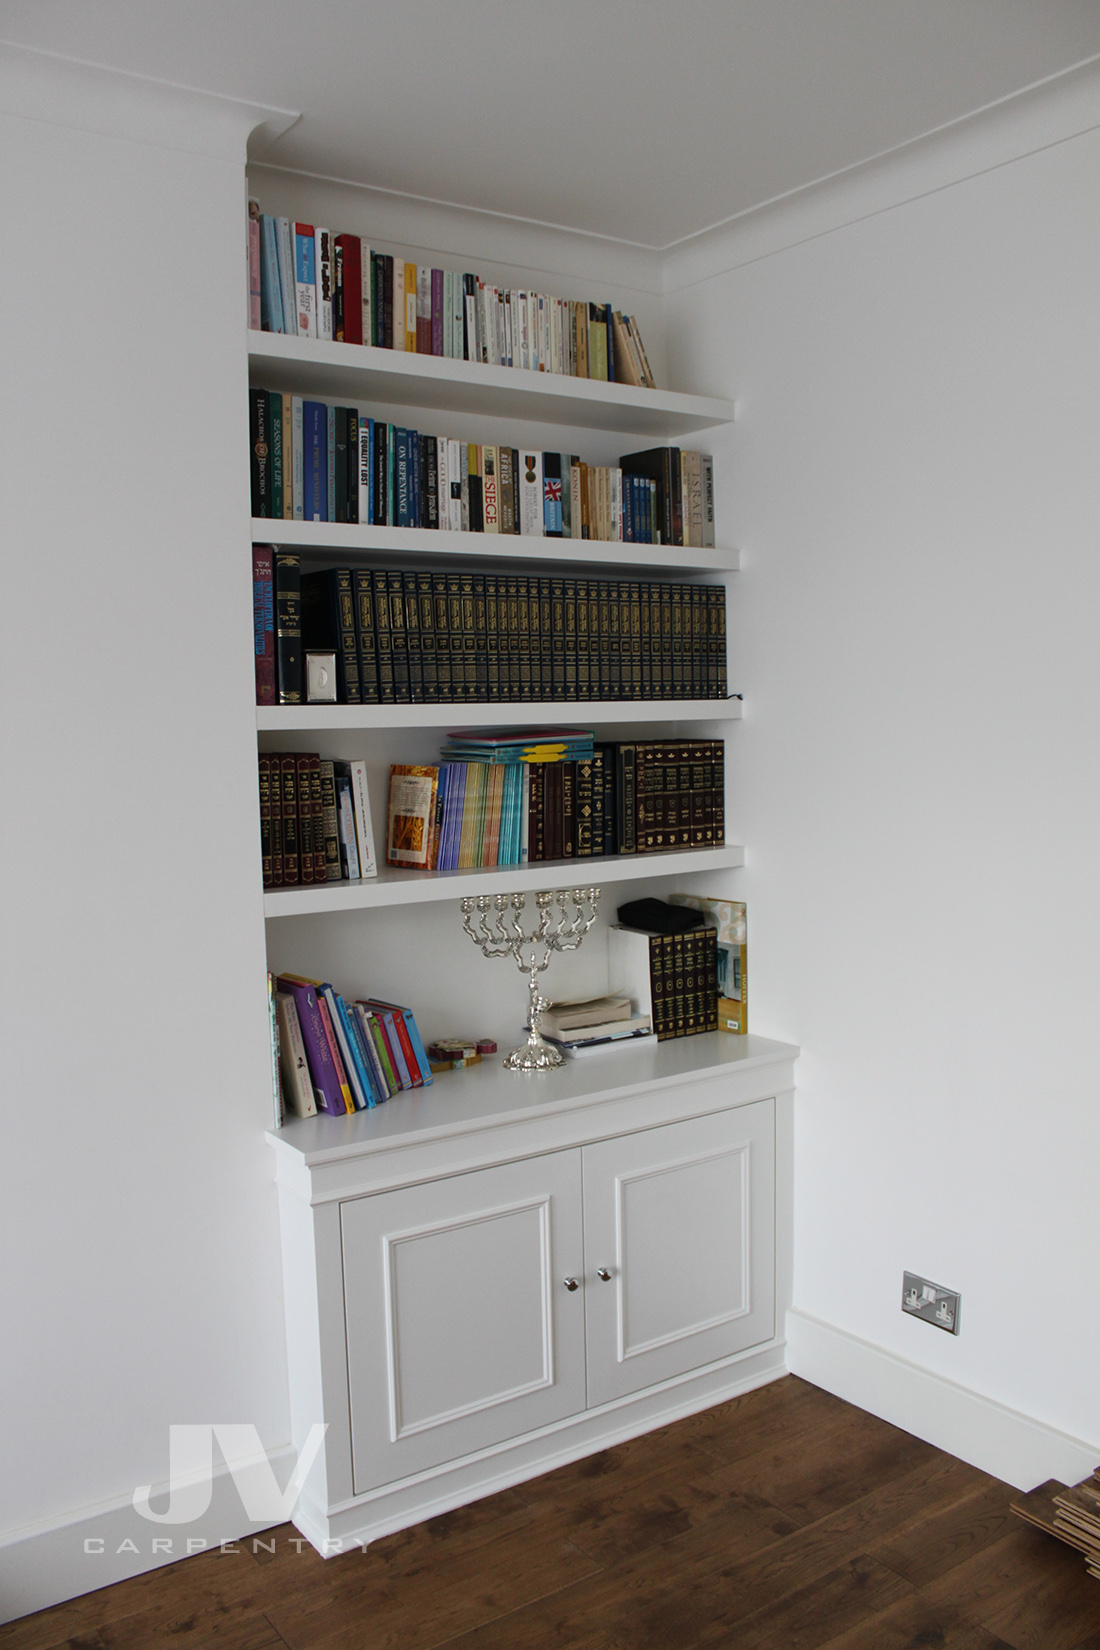 traditional cabinets with floating shelves (RHS)